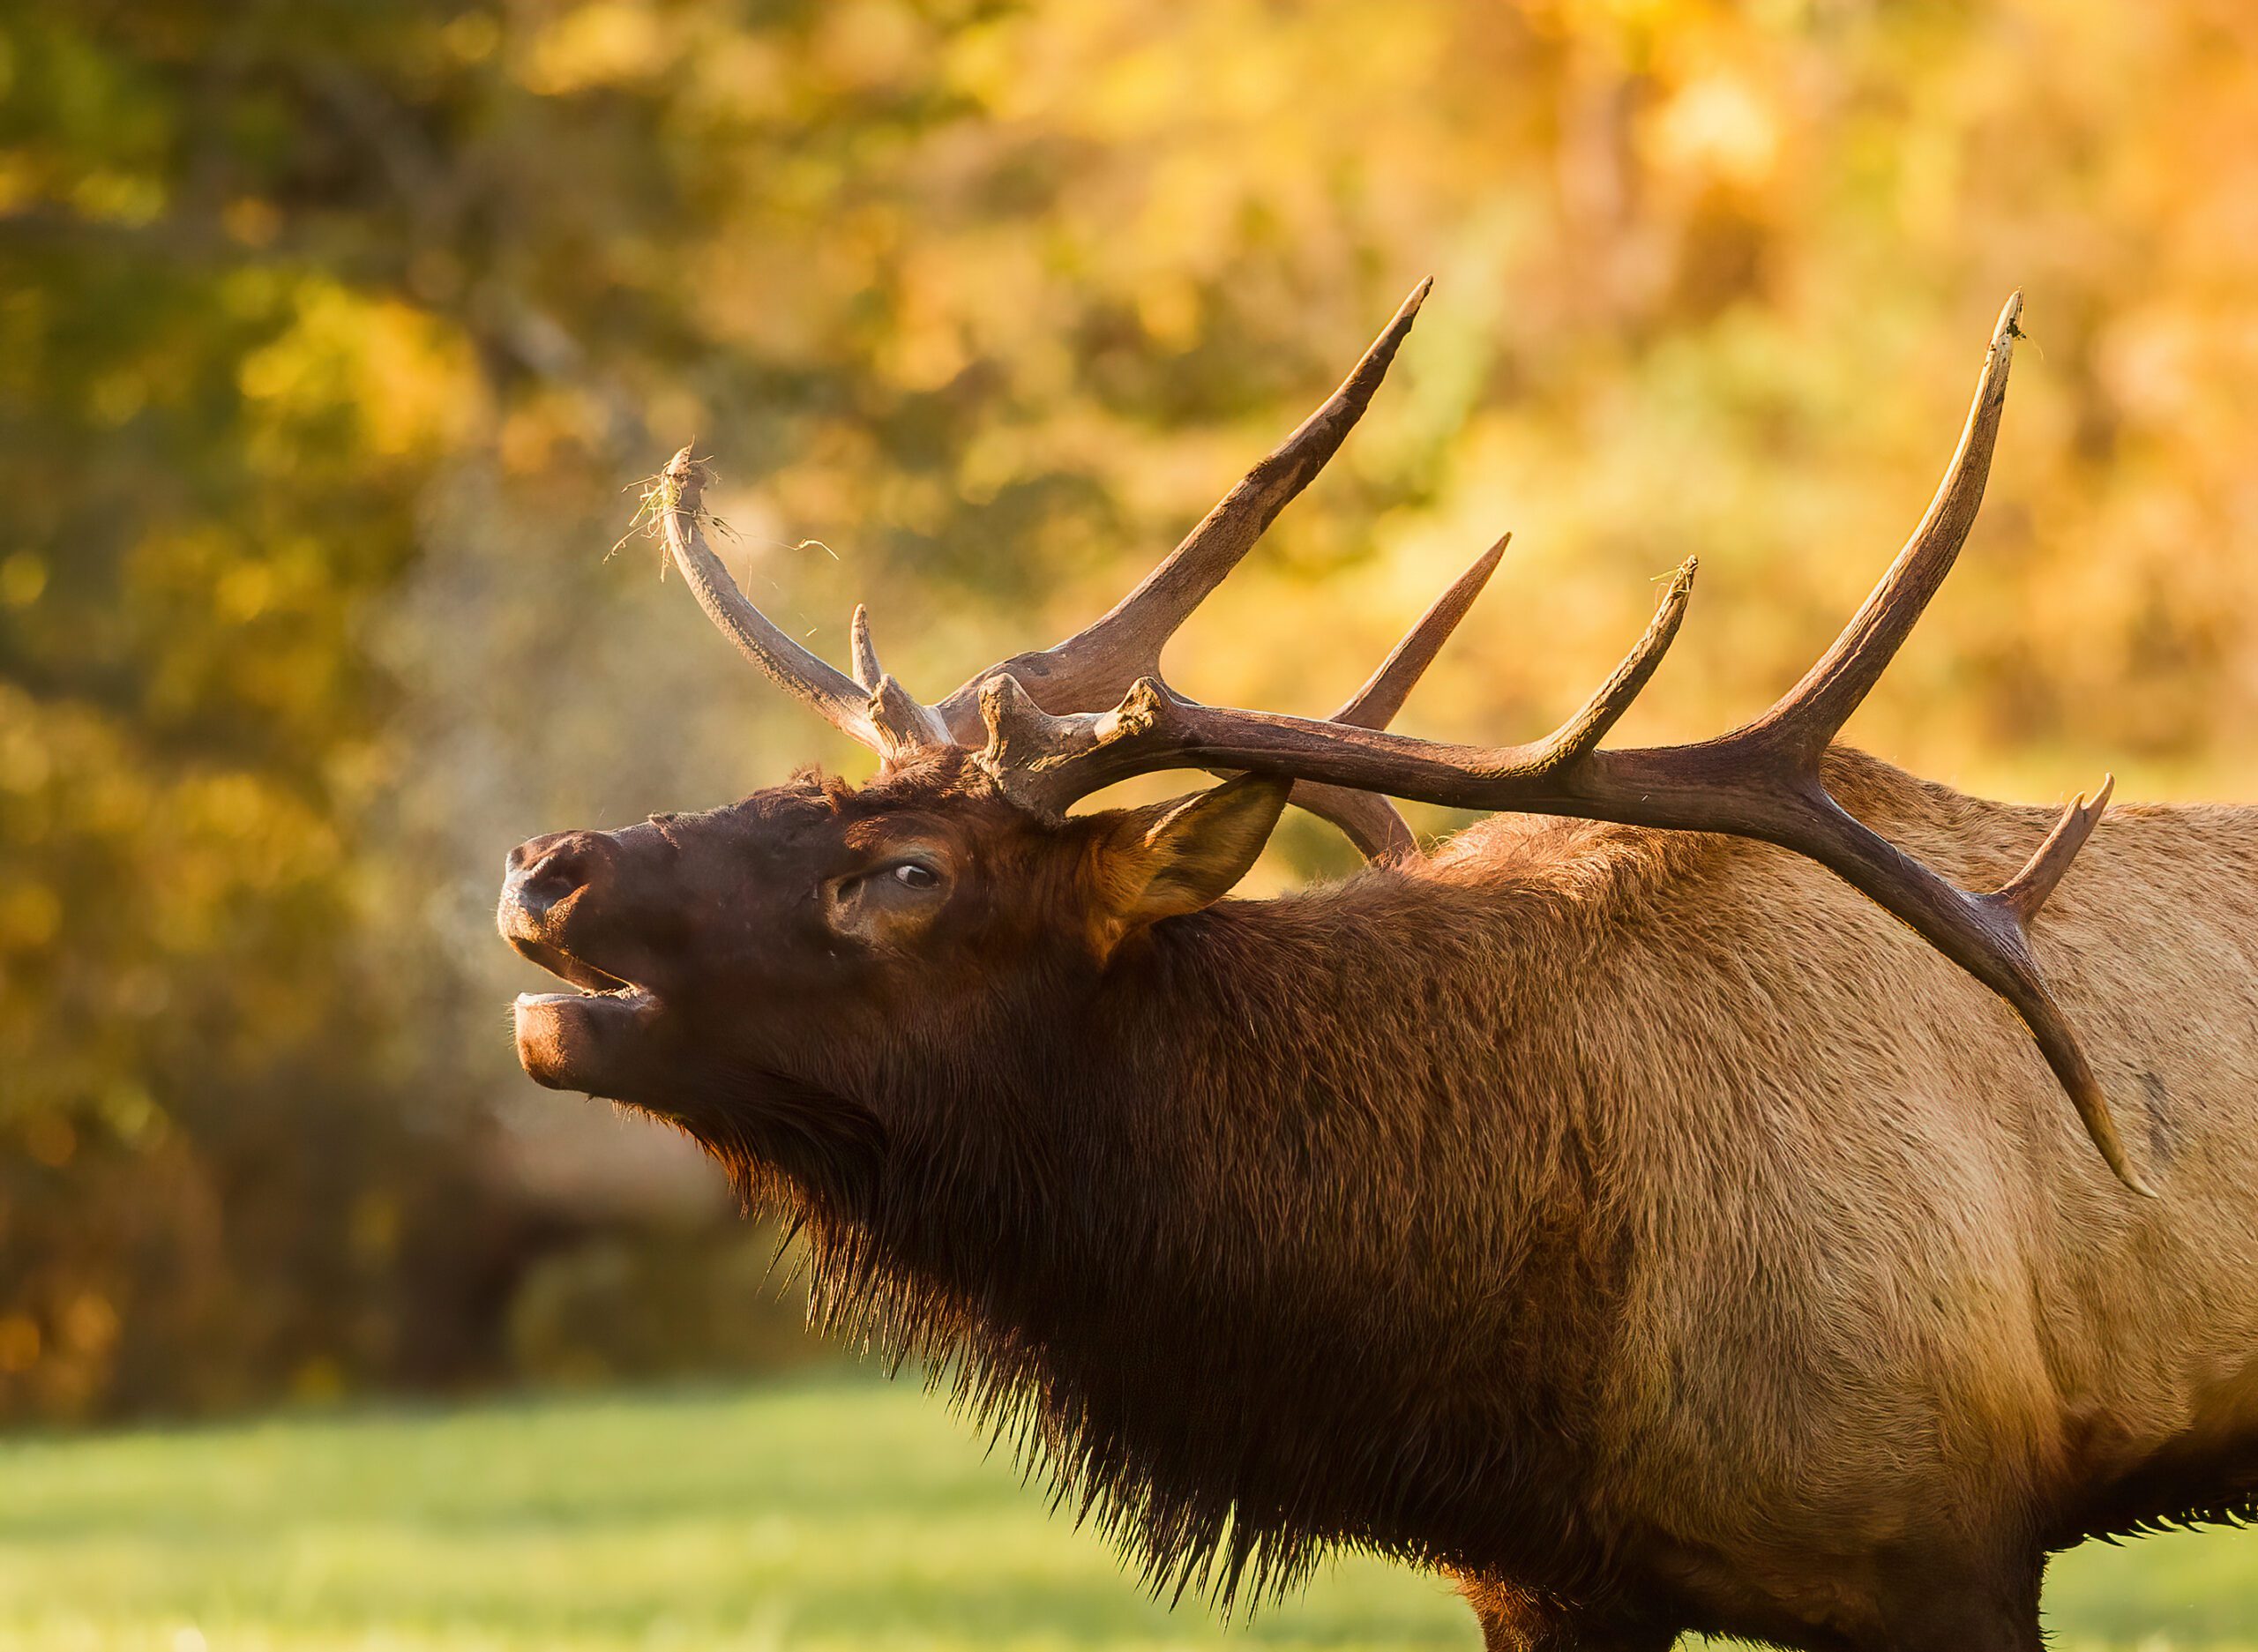 Photo by Deborah Roy of Charlotte. The Critter category winner from our 2021 photo contest, said: "I captured this image of a gorgeous bugling bull elk on a beautiful fall morning in the Cataloochee Valley. The air was crisp and cool, allowing the steam from his breath to be captured. The sound of bugling elk combined with stunning foliage is amazing. This is definitely a fall trip that everyone should try to experience."